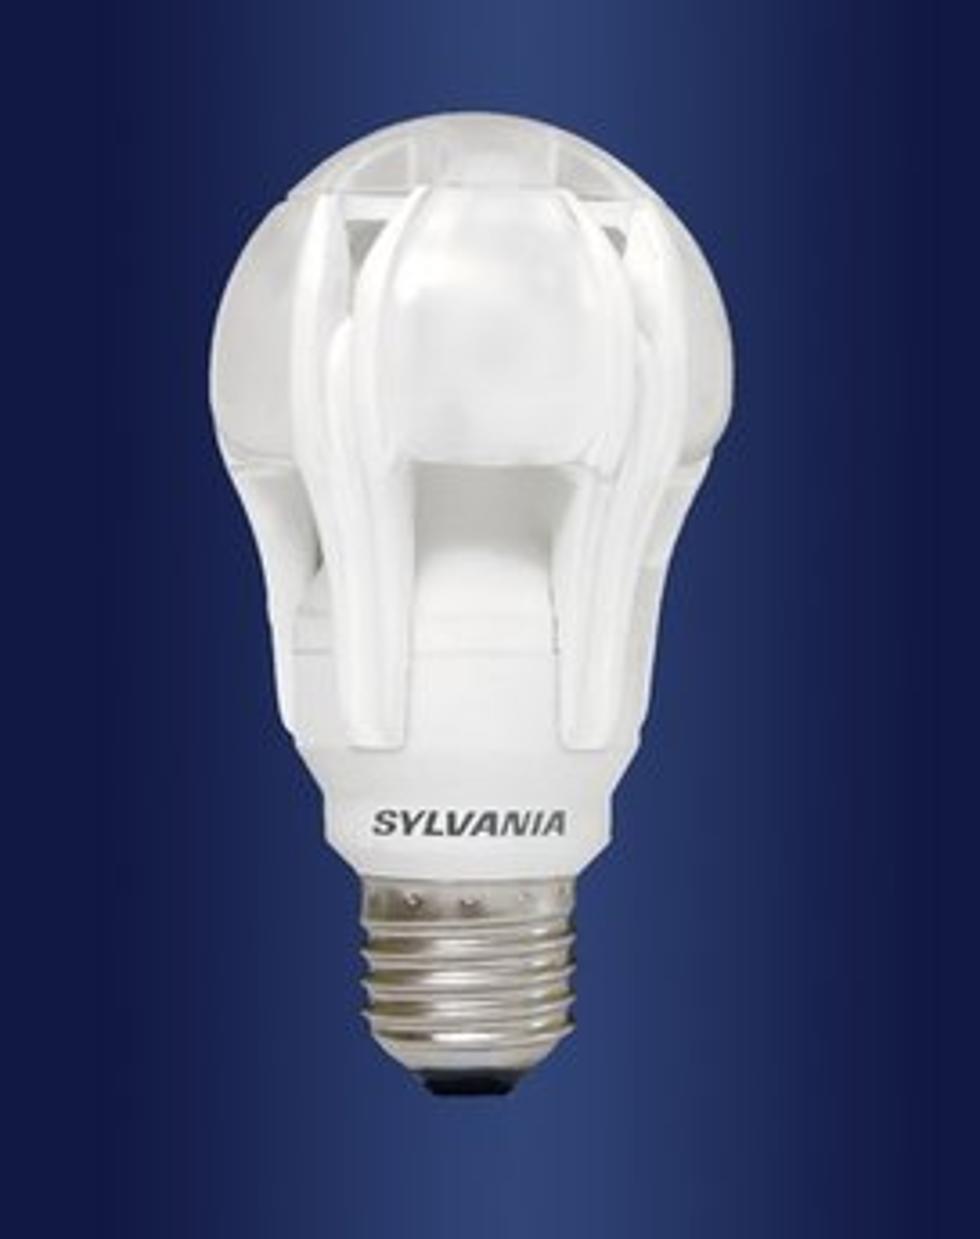 The Newest Thing In Lightbulbs Will Cost You Like The Newest Thing. Sylvania Showcases Federally Mandated Light Technology